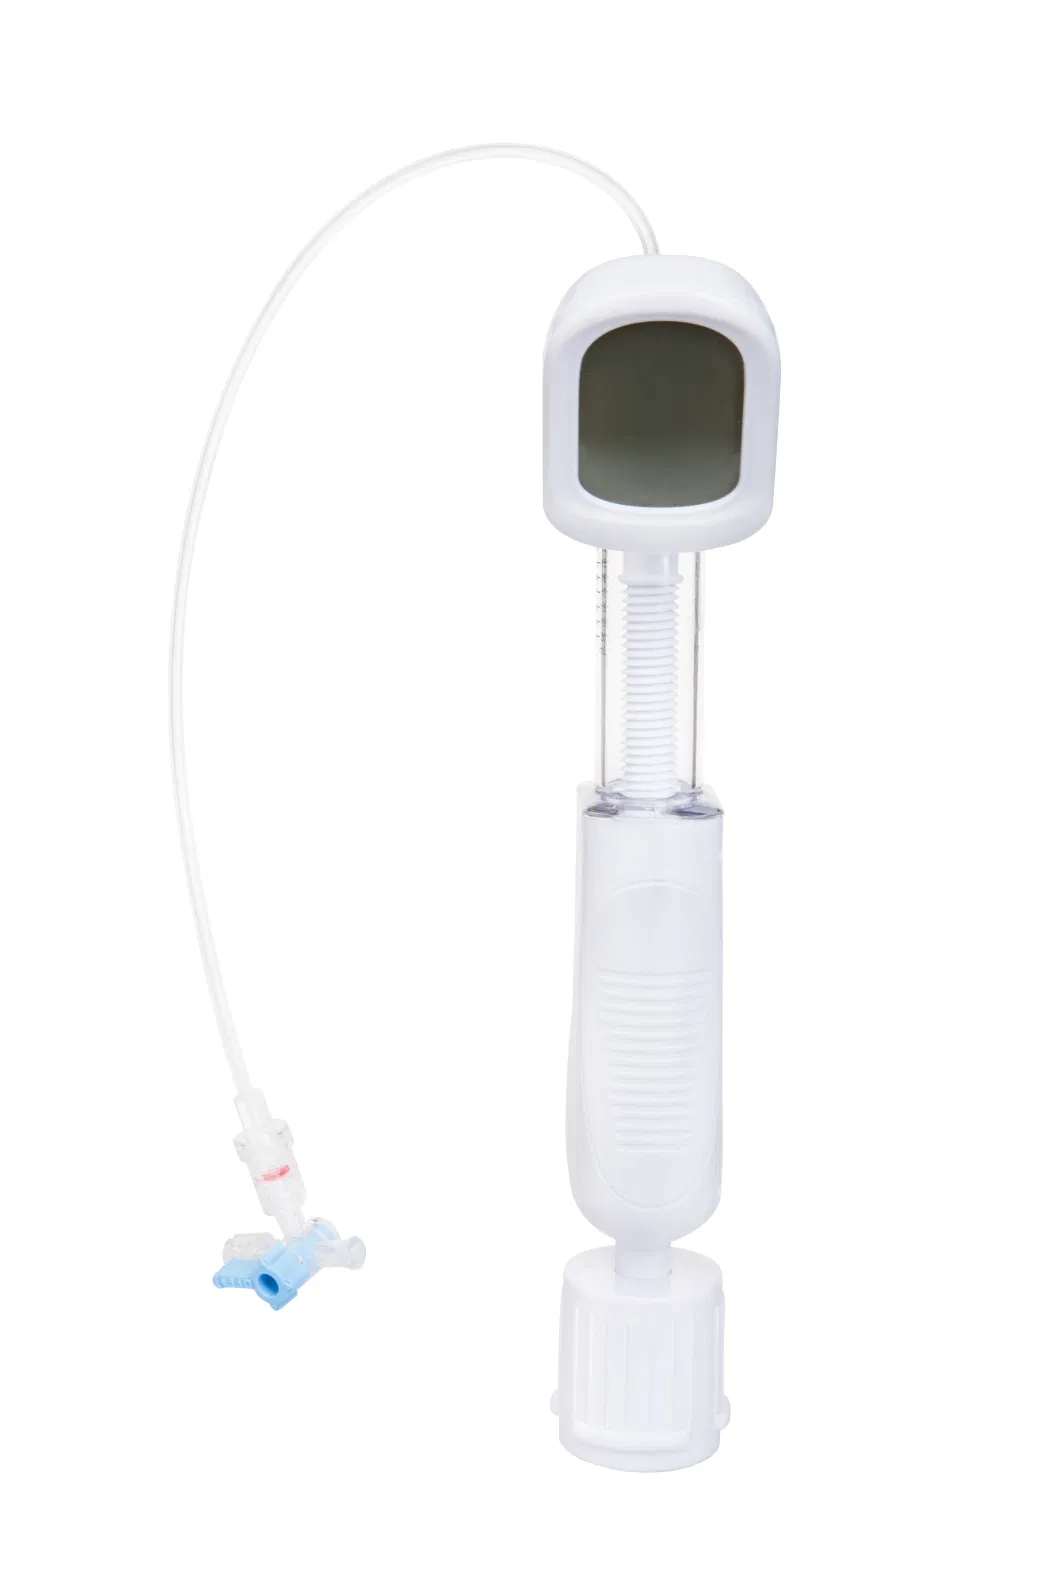 Disposable Medical Balloon Inflation Device with Digital Displayer and Stopcock